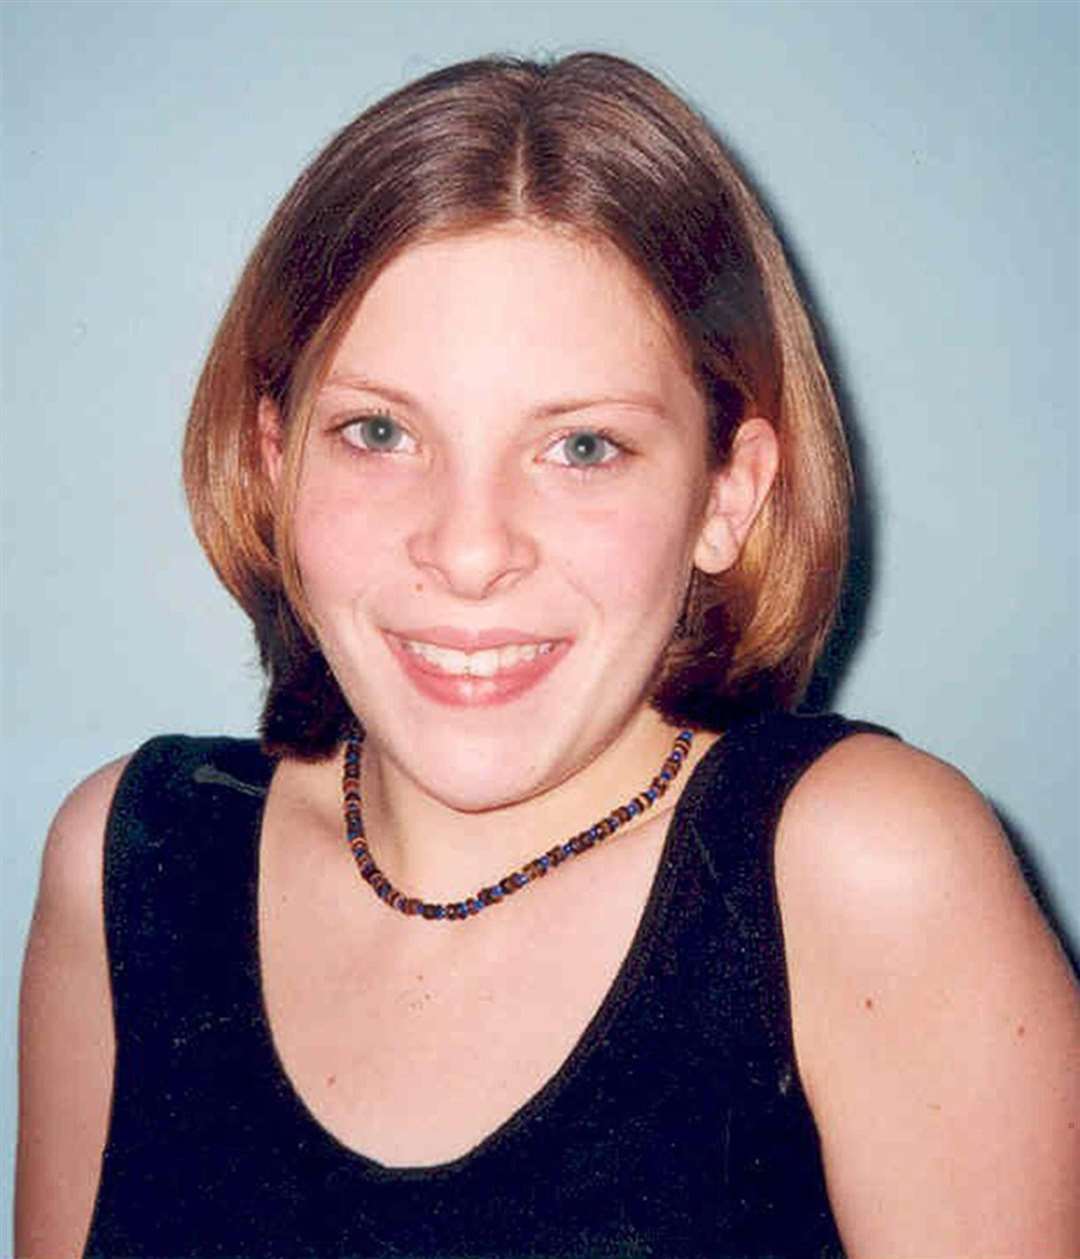 Bellfield was found guilty of the murder of Milly Dowler, who went missing in 2002 (Surrey Police/PA)